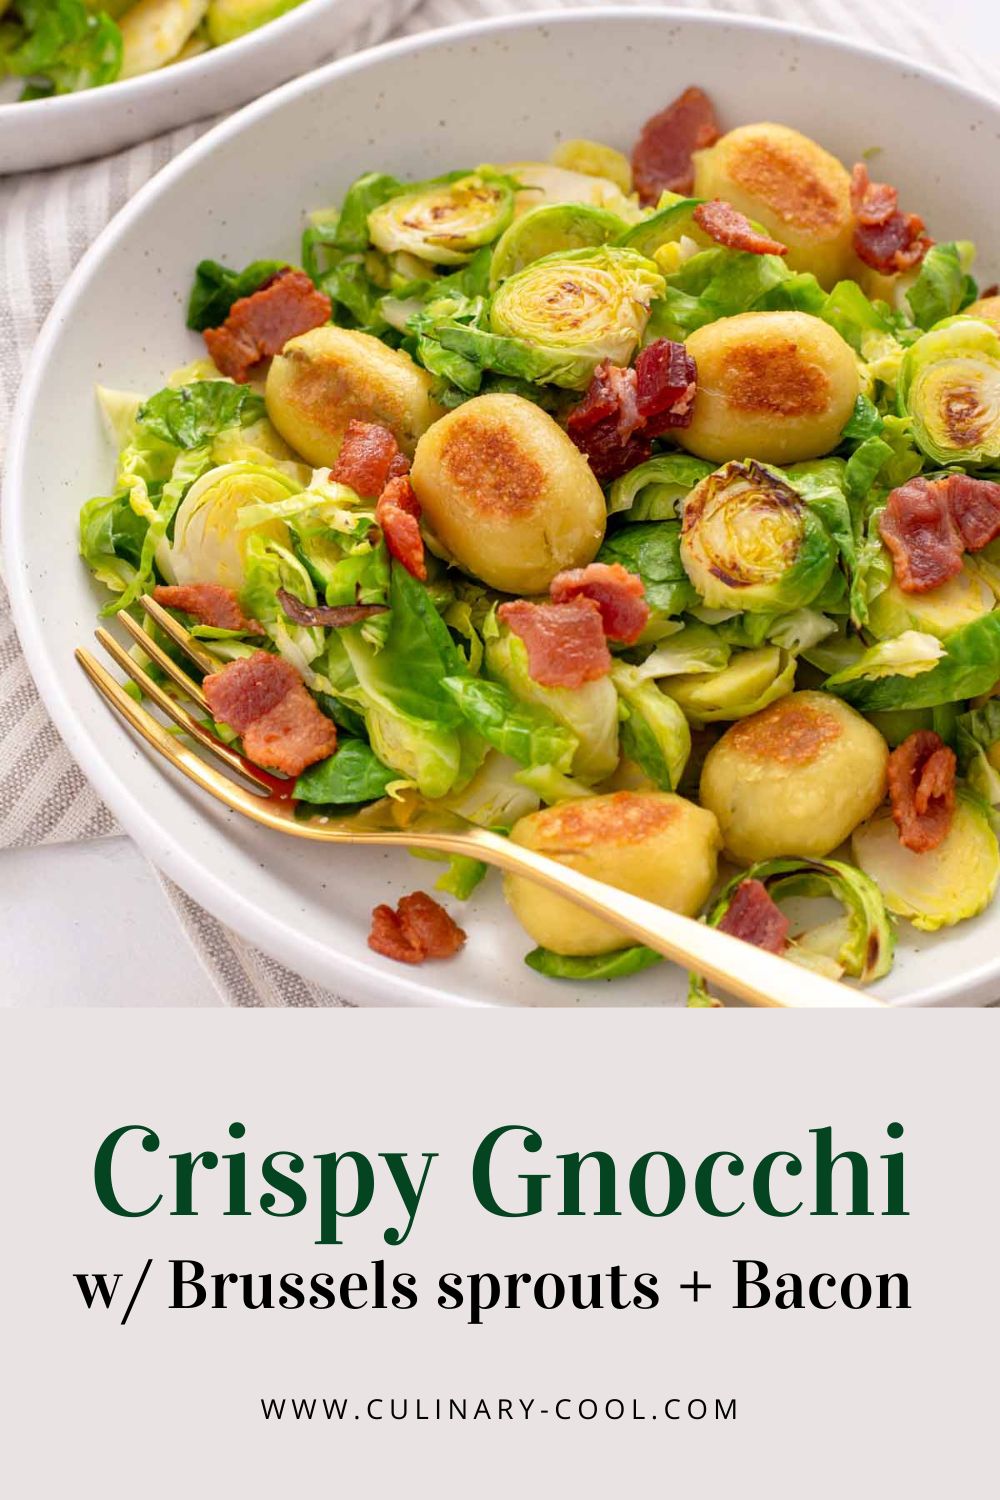 Crispy Gnocchi with Brussels sprouts and Bacon